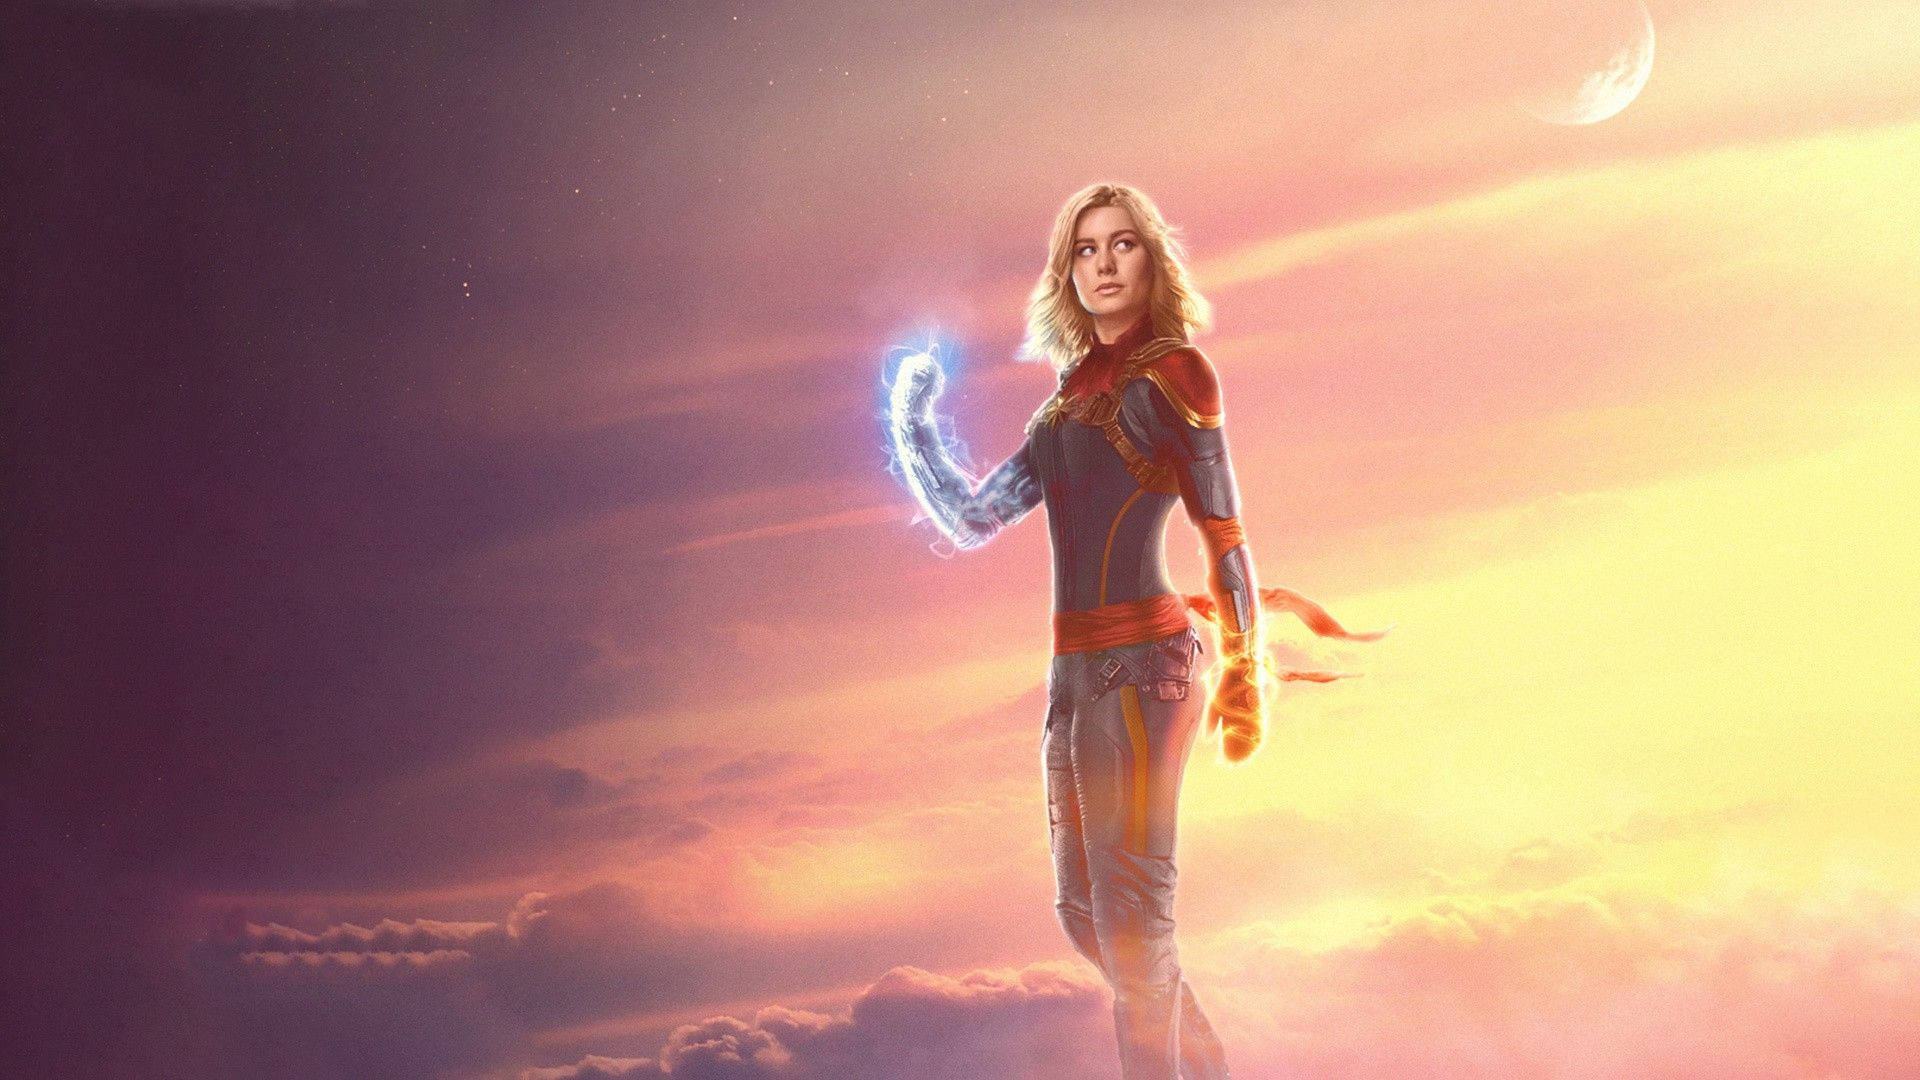 Brie Larson is the powerful Captain Marvel Wallpaper